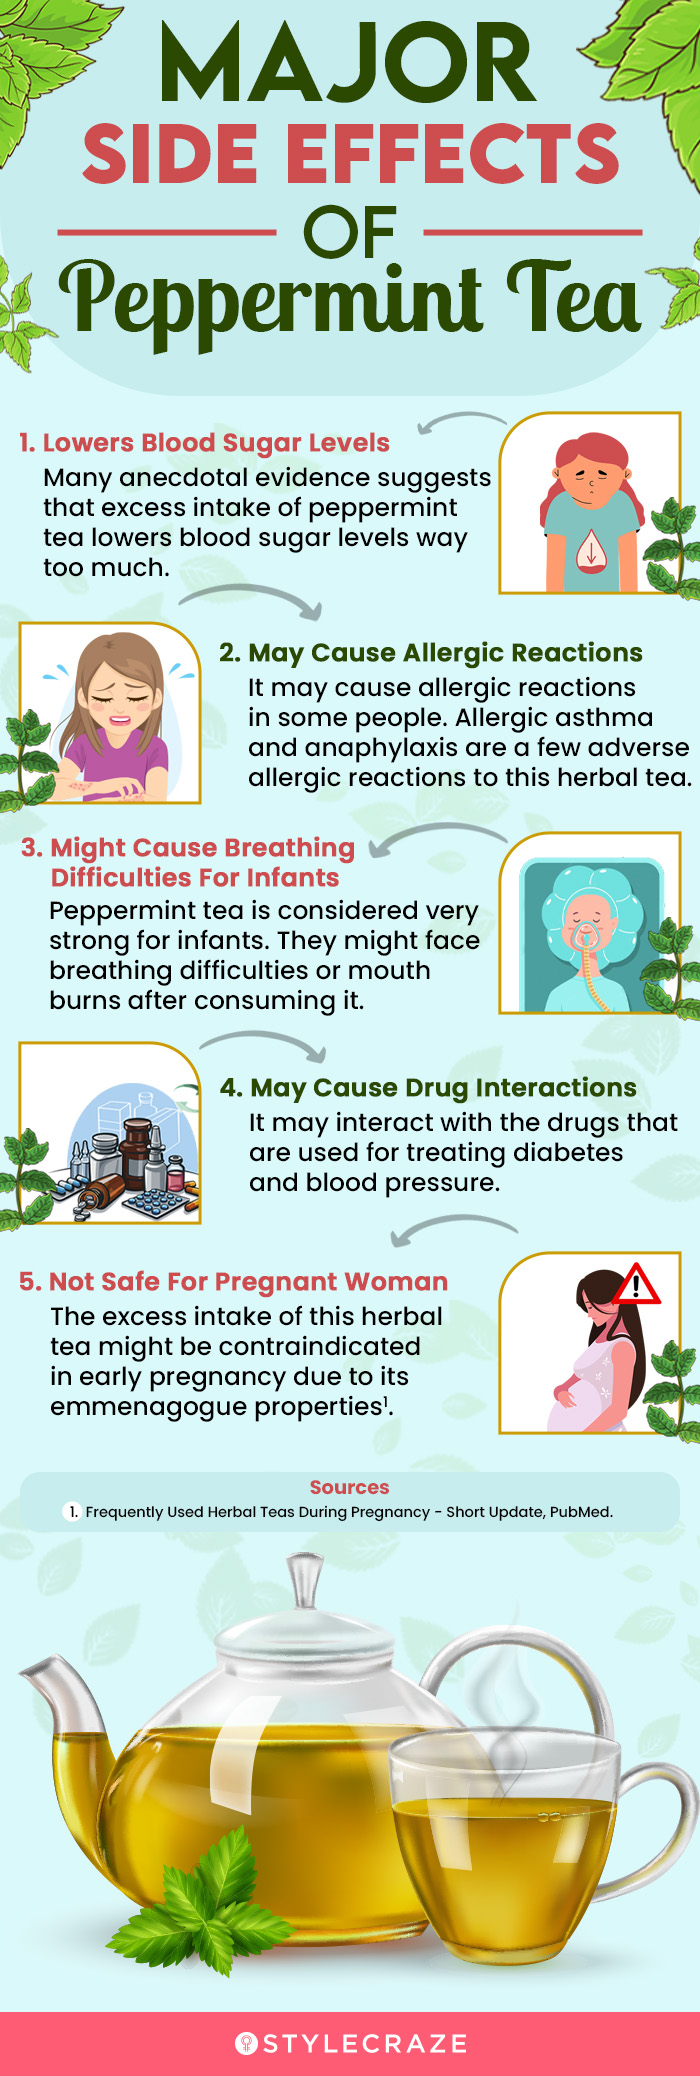 major side effects of peppermint tea (infographic)